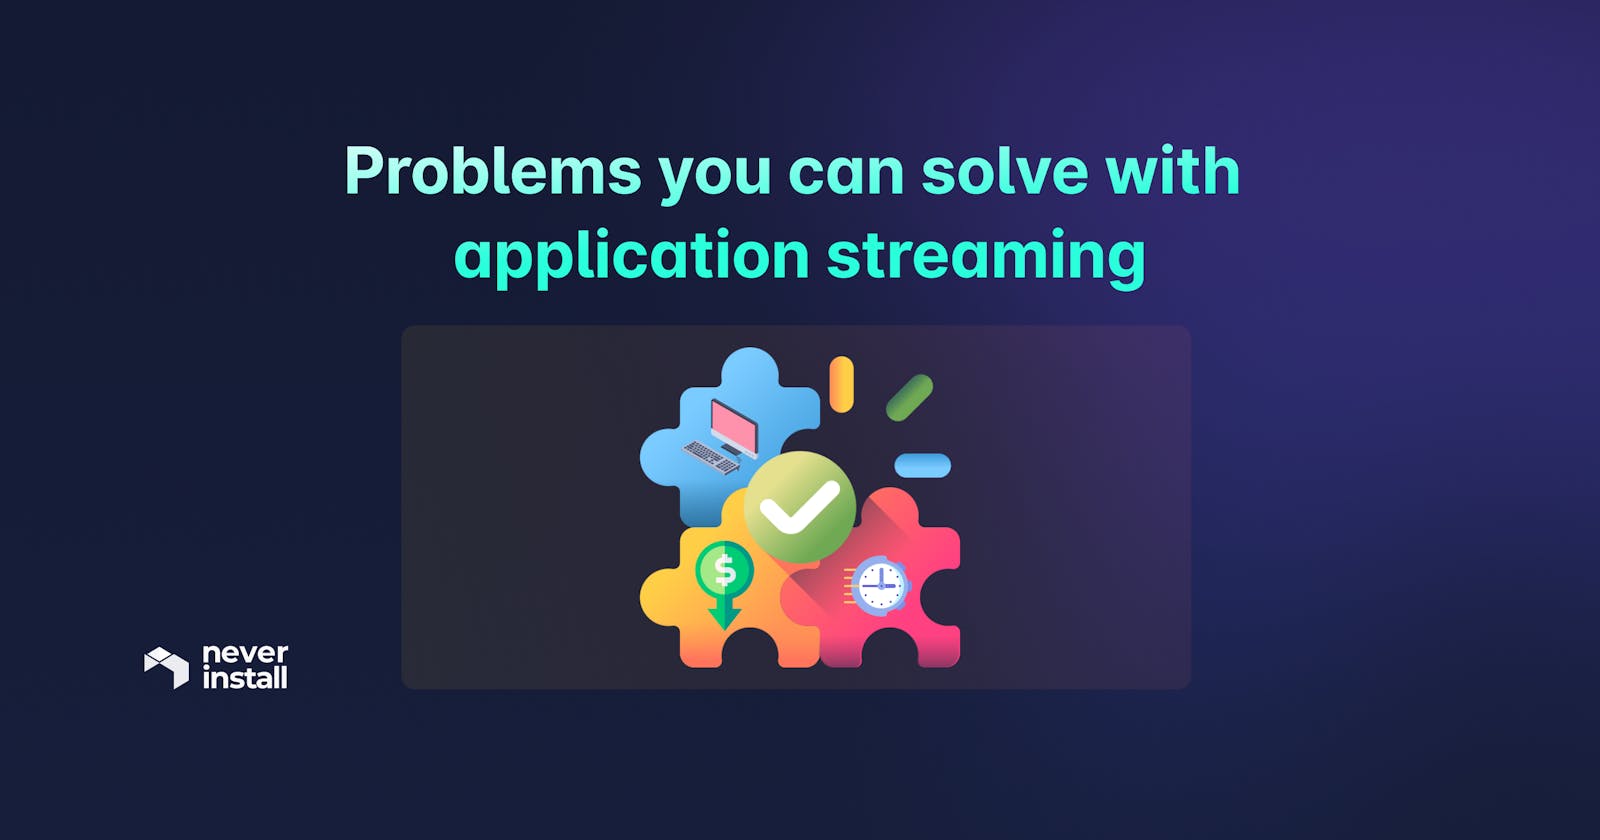 Problems you can solve with application streaming